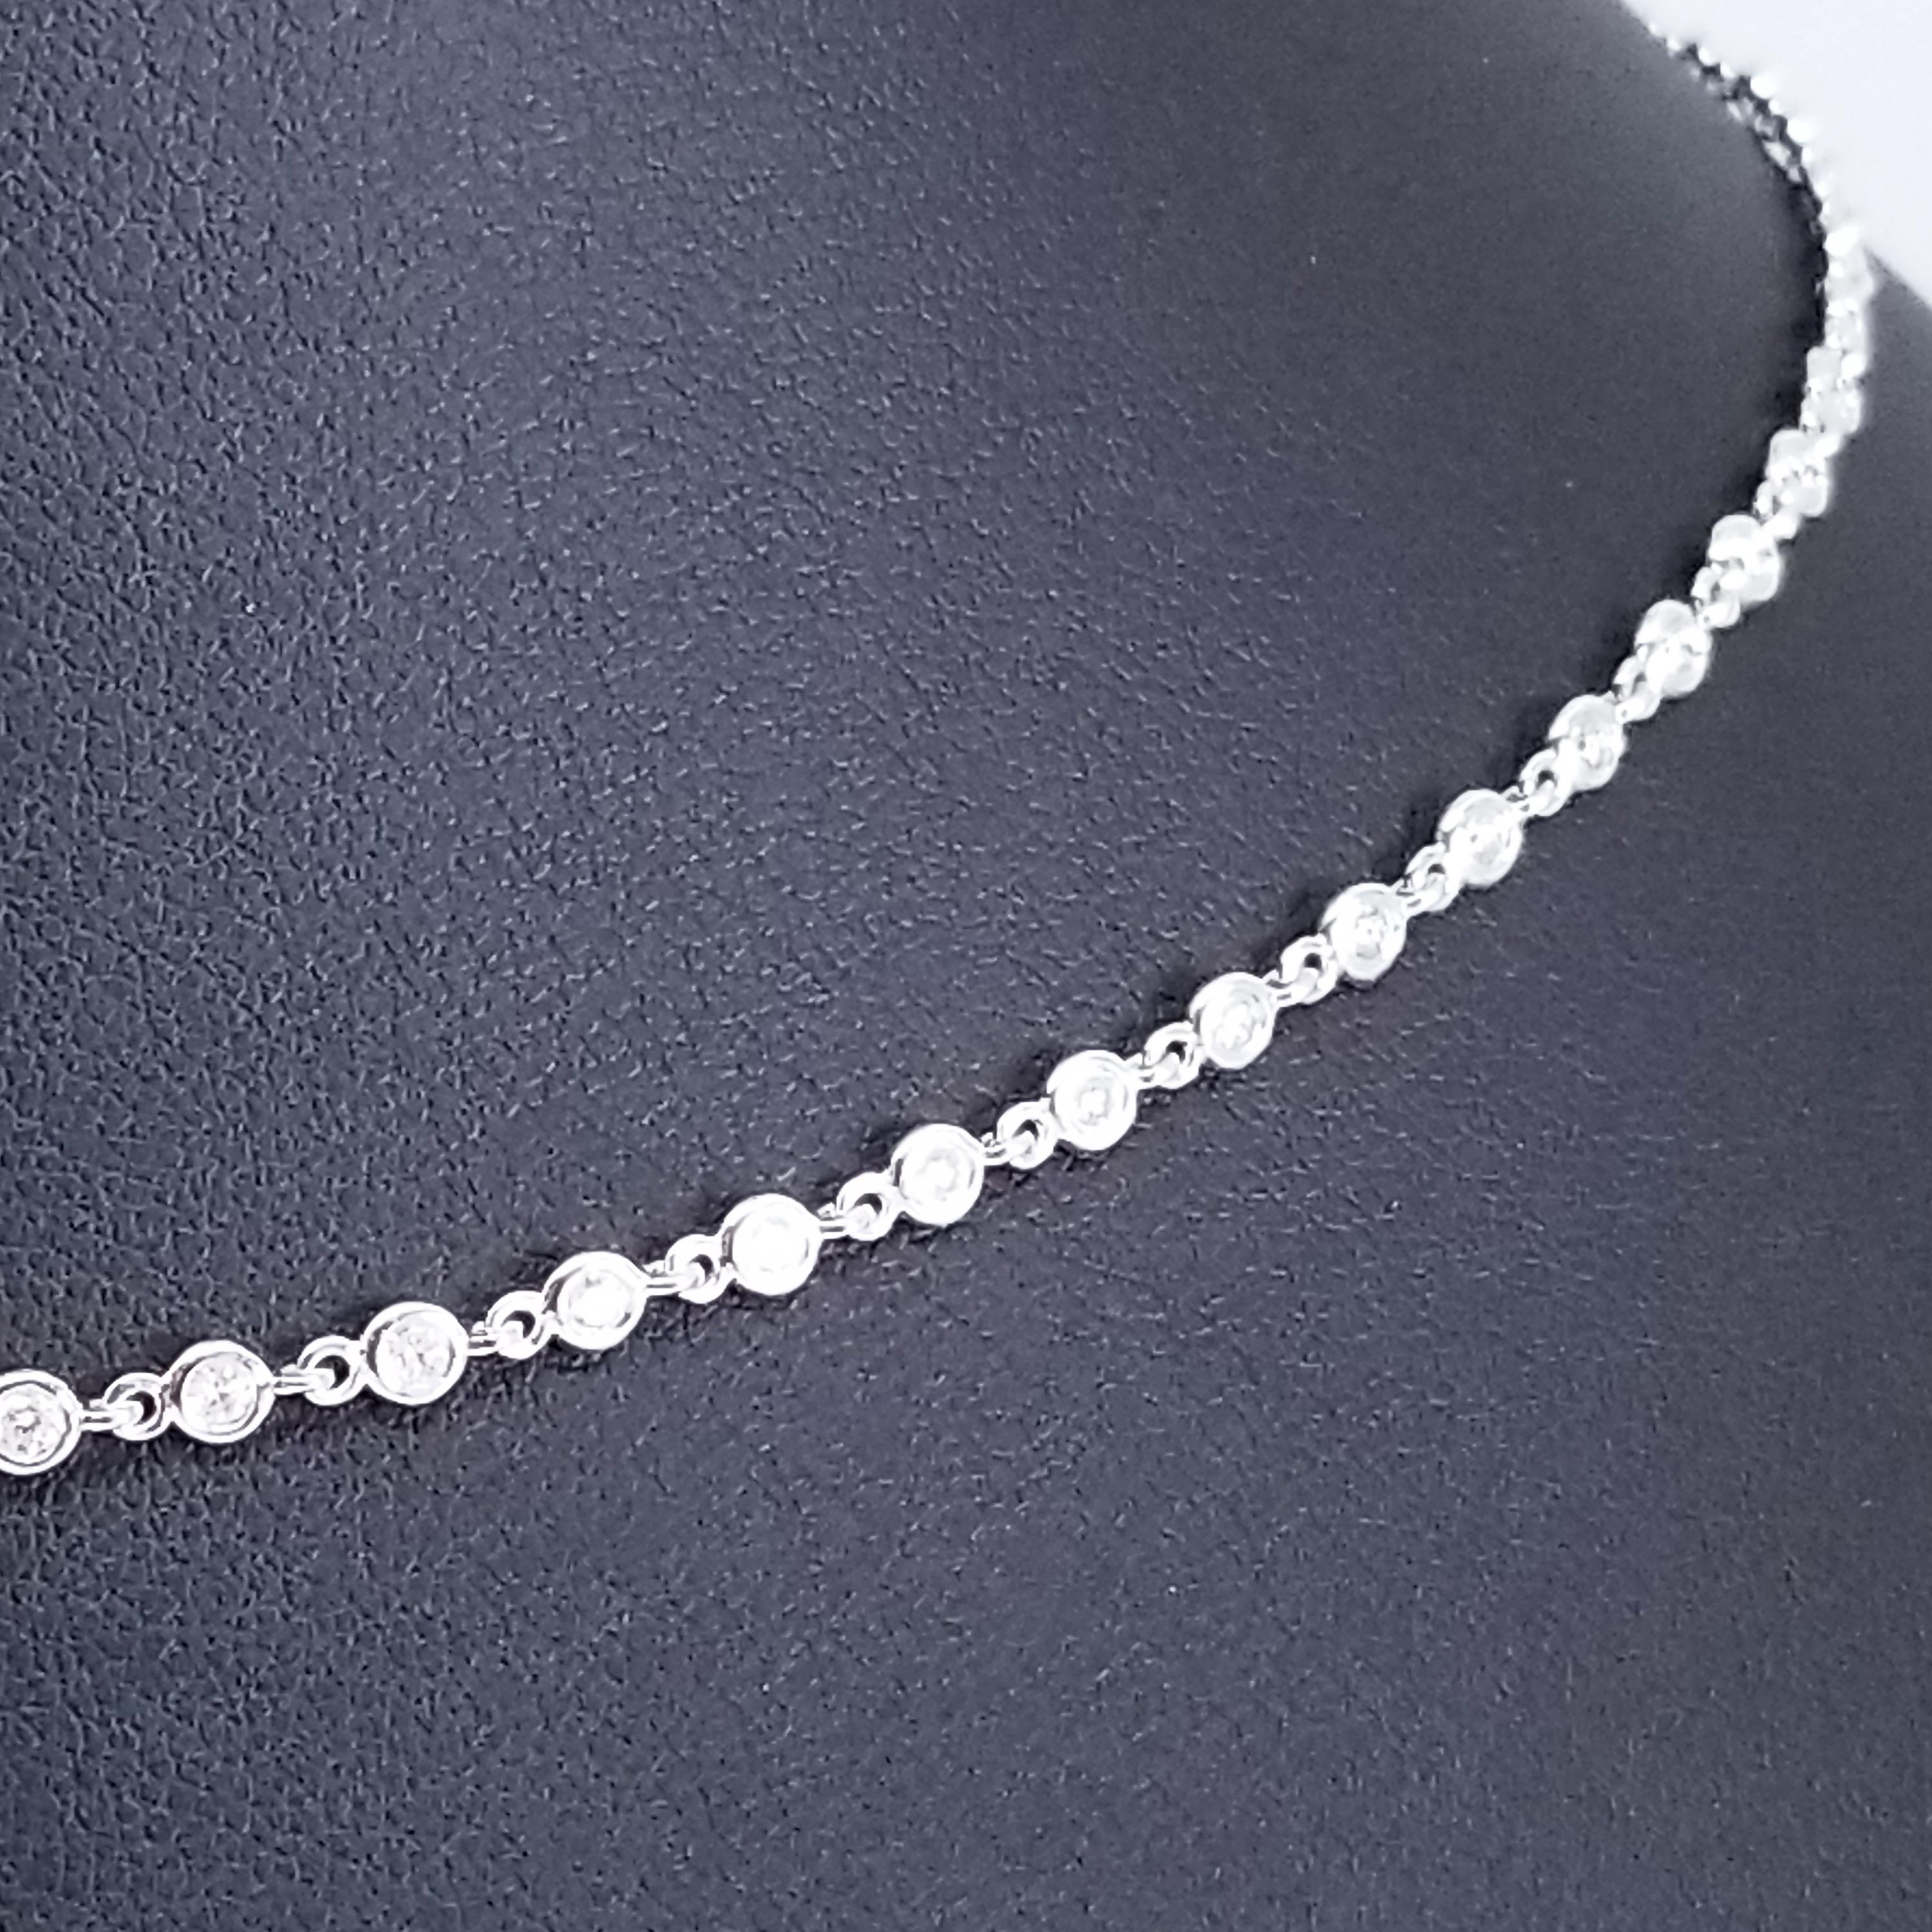 Classic Contempory Diamond Choker Necklace. The one and only Necklace needed in any and every wardrobe. Everyday, dress up or down, swim or sleep, this Necklace adds sparkle to your every movement. Round Brilliant Diamonds are bezel set and